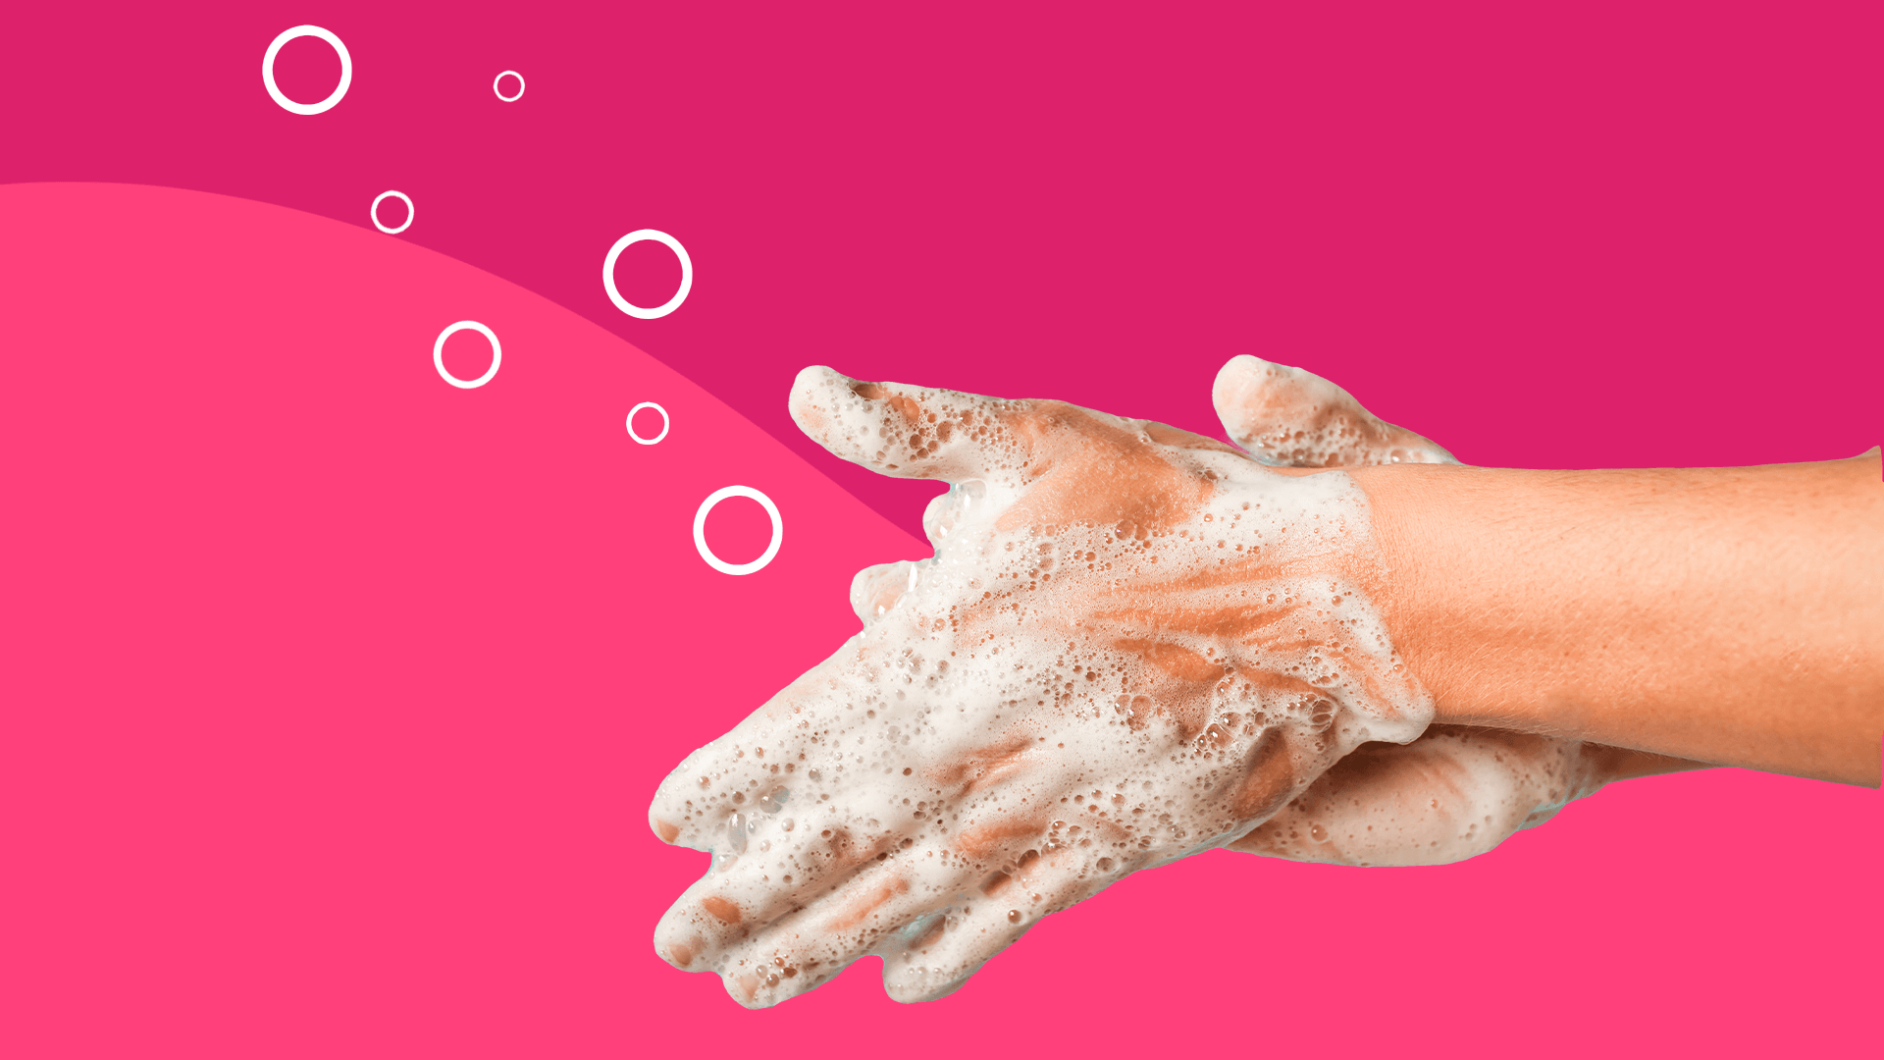 Washing hands represents living with OCD